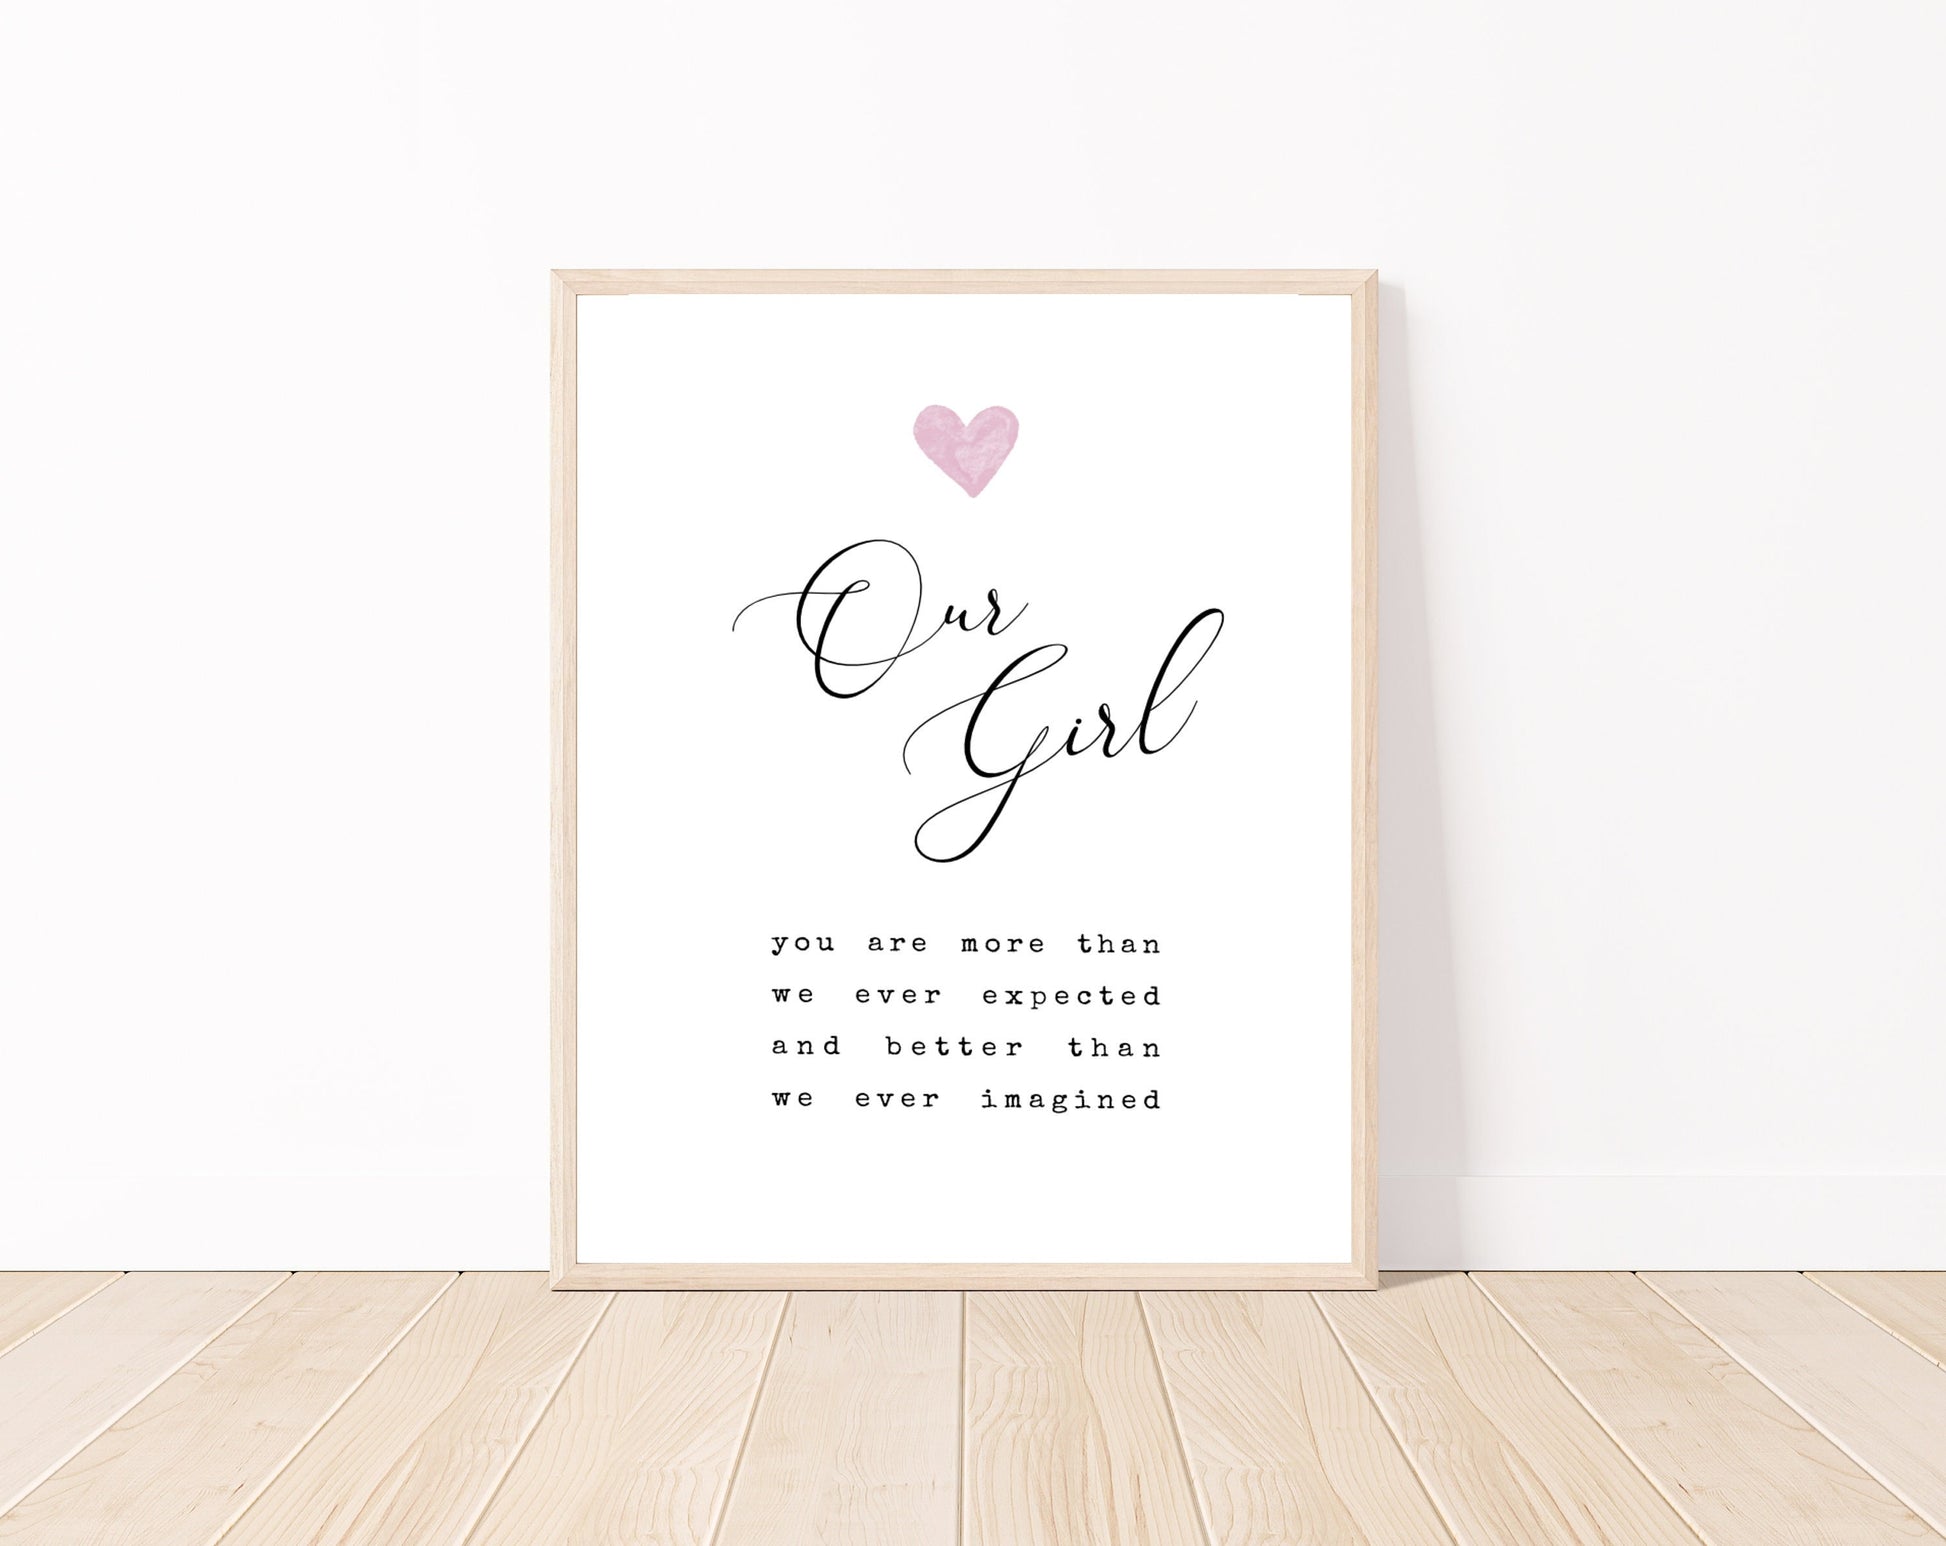 A little girl’s room digital print placed on a white wall and parquet flooring that has a pink heart at the top: one pink and two light brown, and a piece of writing that says: “Our girl, you are more than we ever expected and better than we ever imagined.”